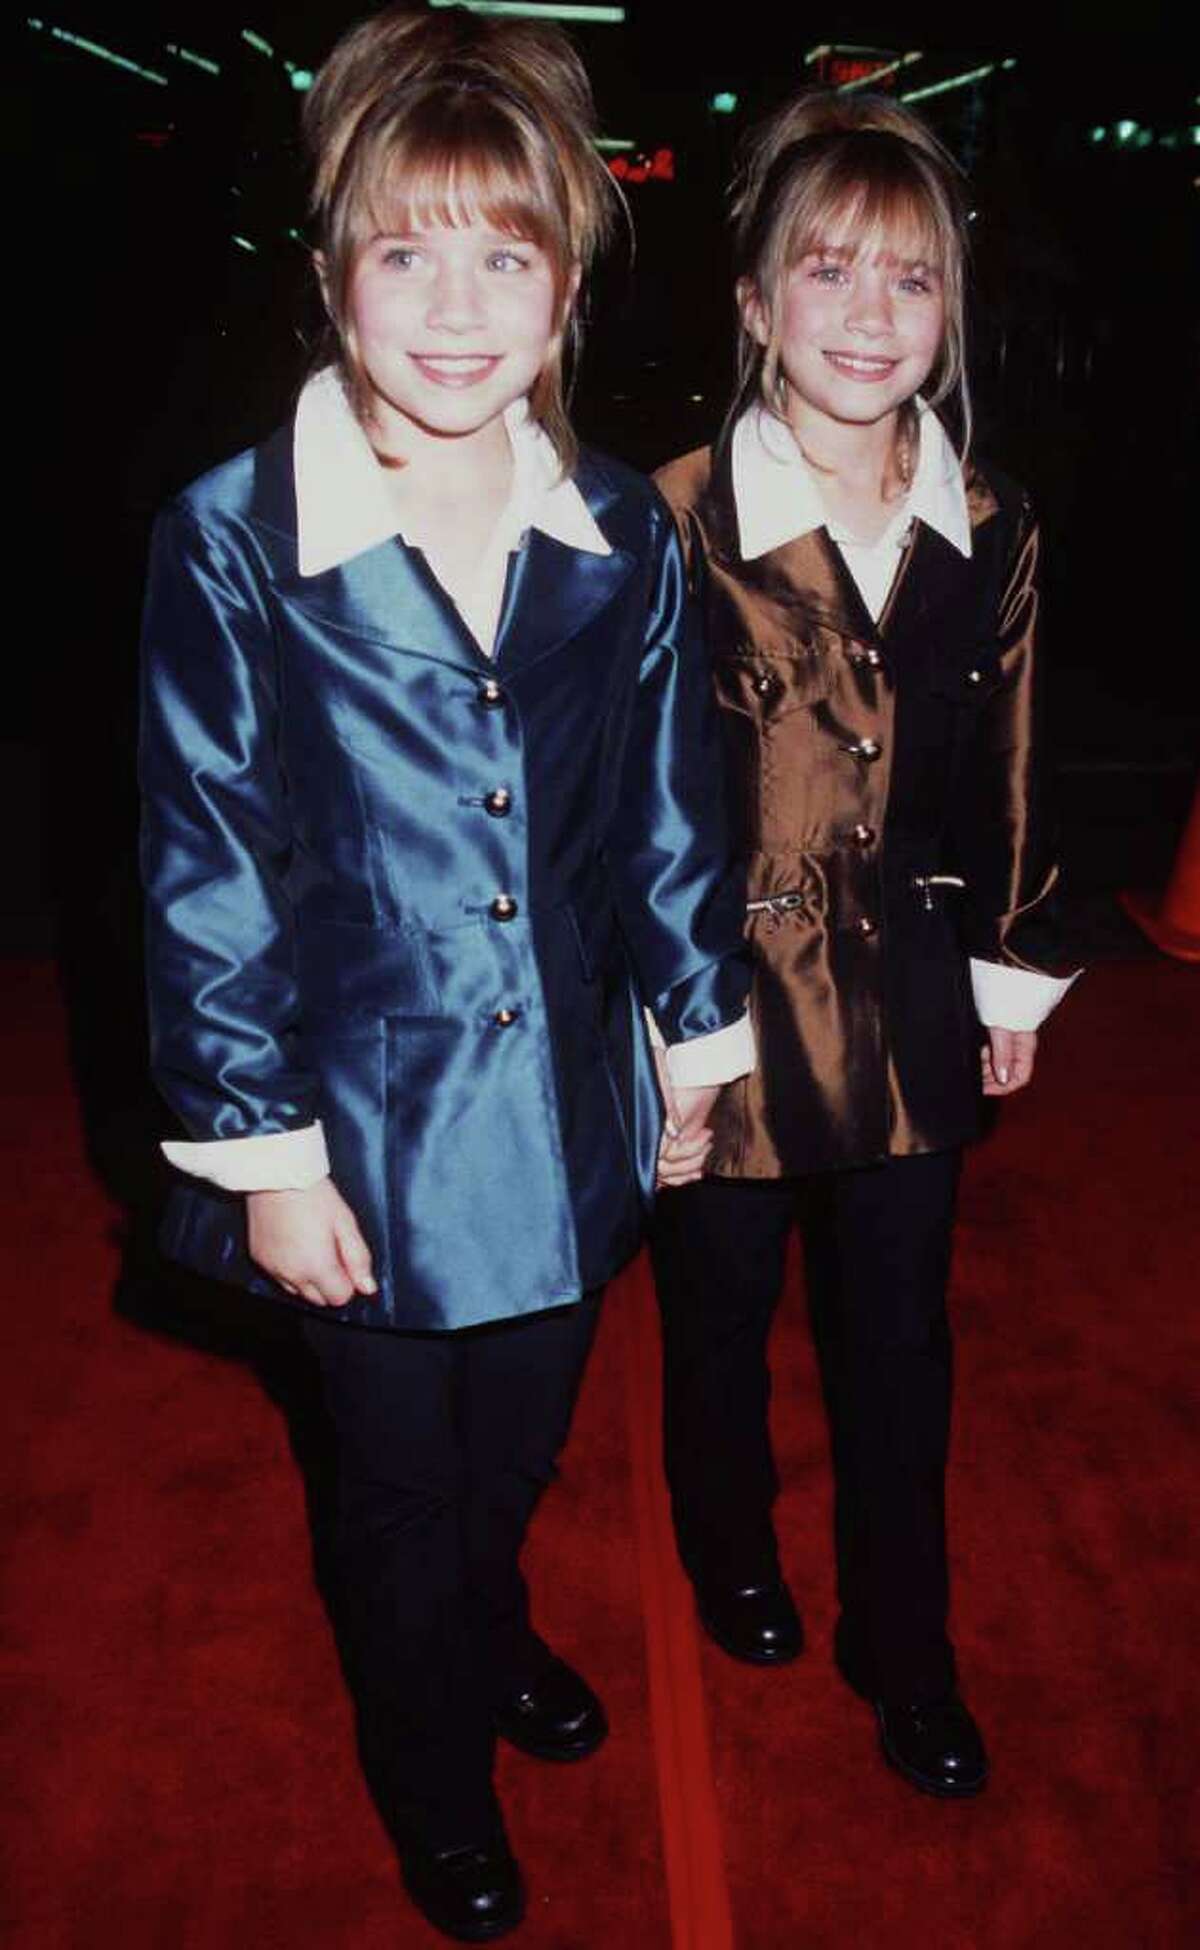 The Olsen twins at the premiere of "Spice World" on January 22, 1998 in Hollywood.